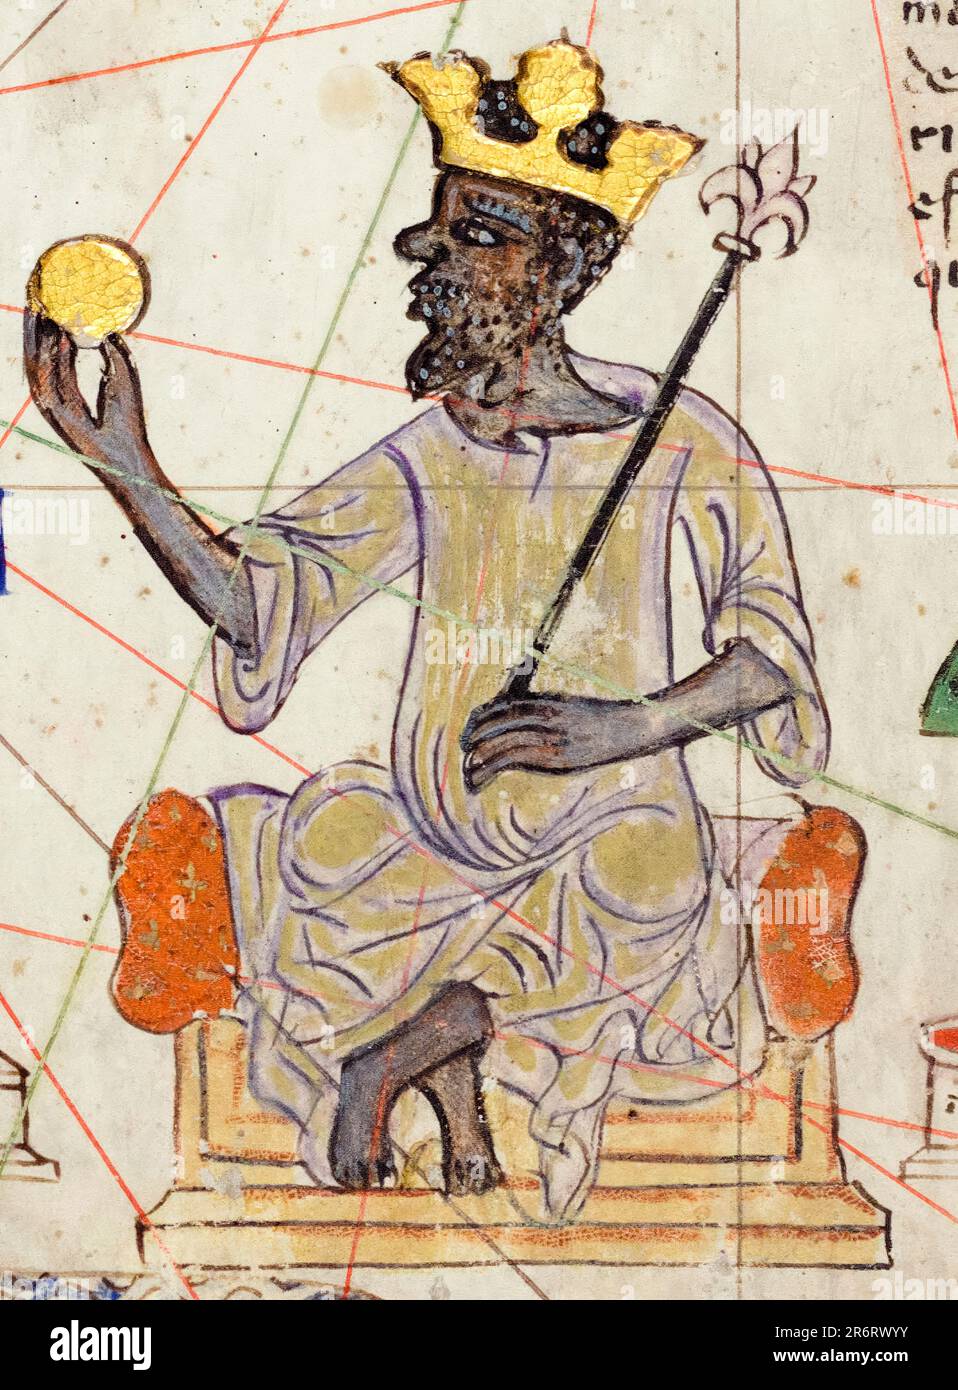 Mansa Musa (1280-1337), ninth ruler of the Mali Empire (circa 1312-1337), sitting on a throne holding a gold coin, portrait drawing by Abraham Cresques, 1375 Stock Photo